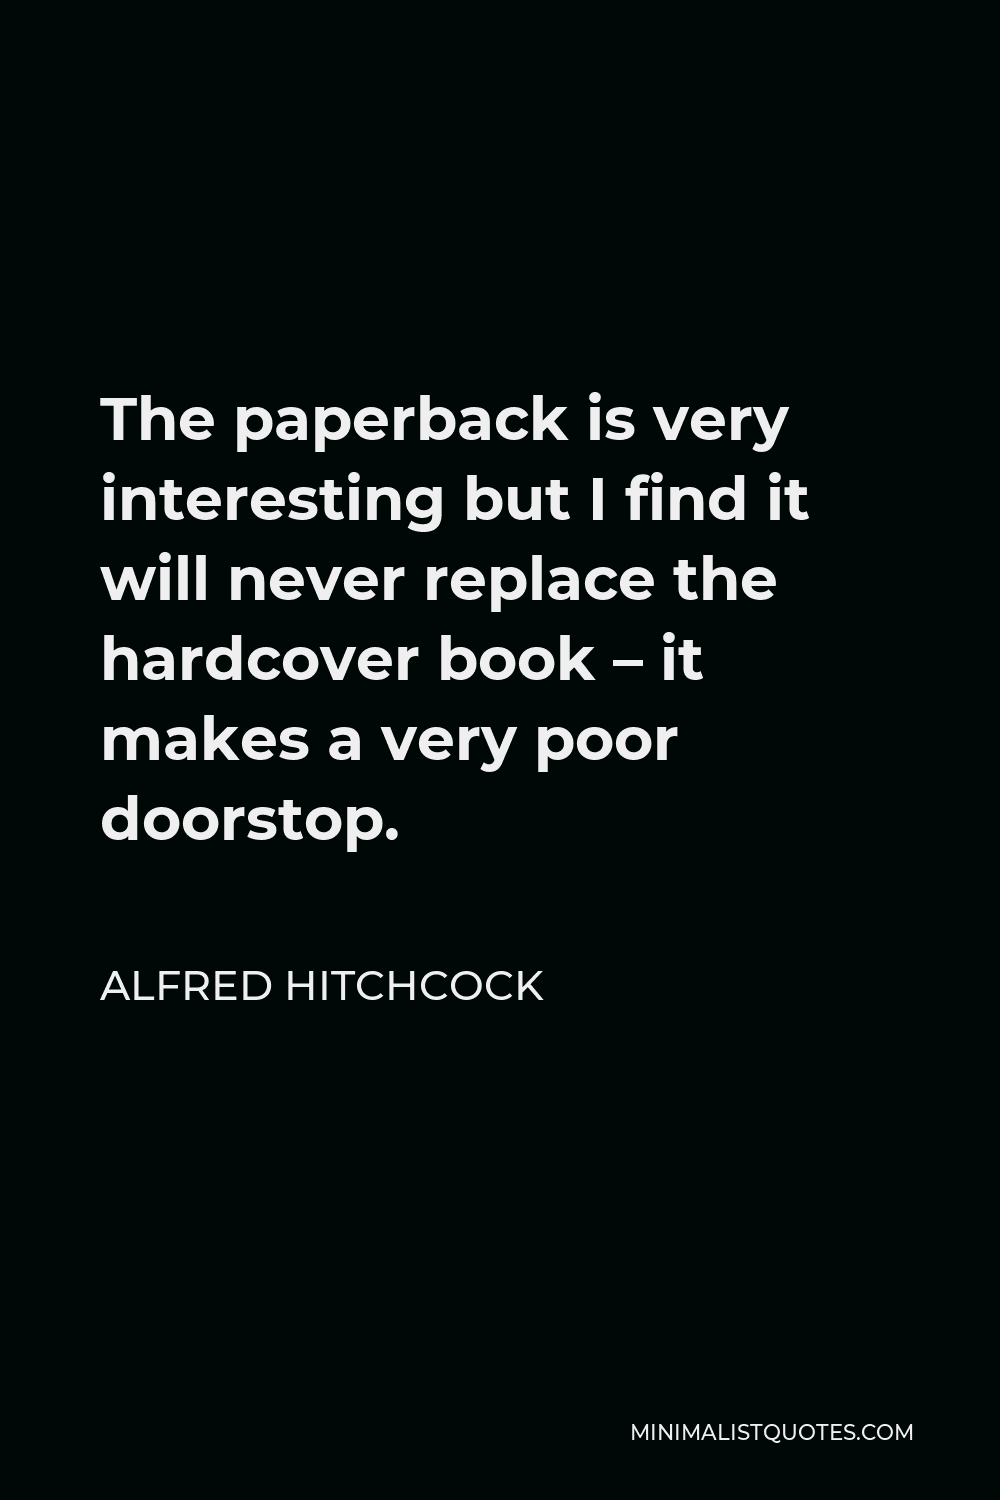 Alfred Hitchcock Quote - The paperback is very interesting but I find it will never replace the hardcover book – it makes a very poor doorstop.